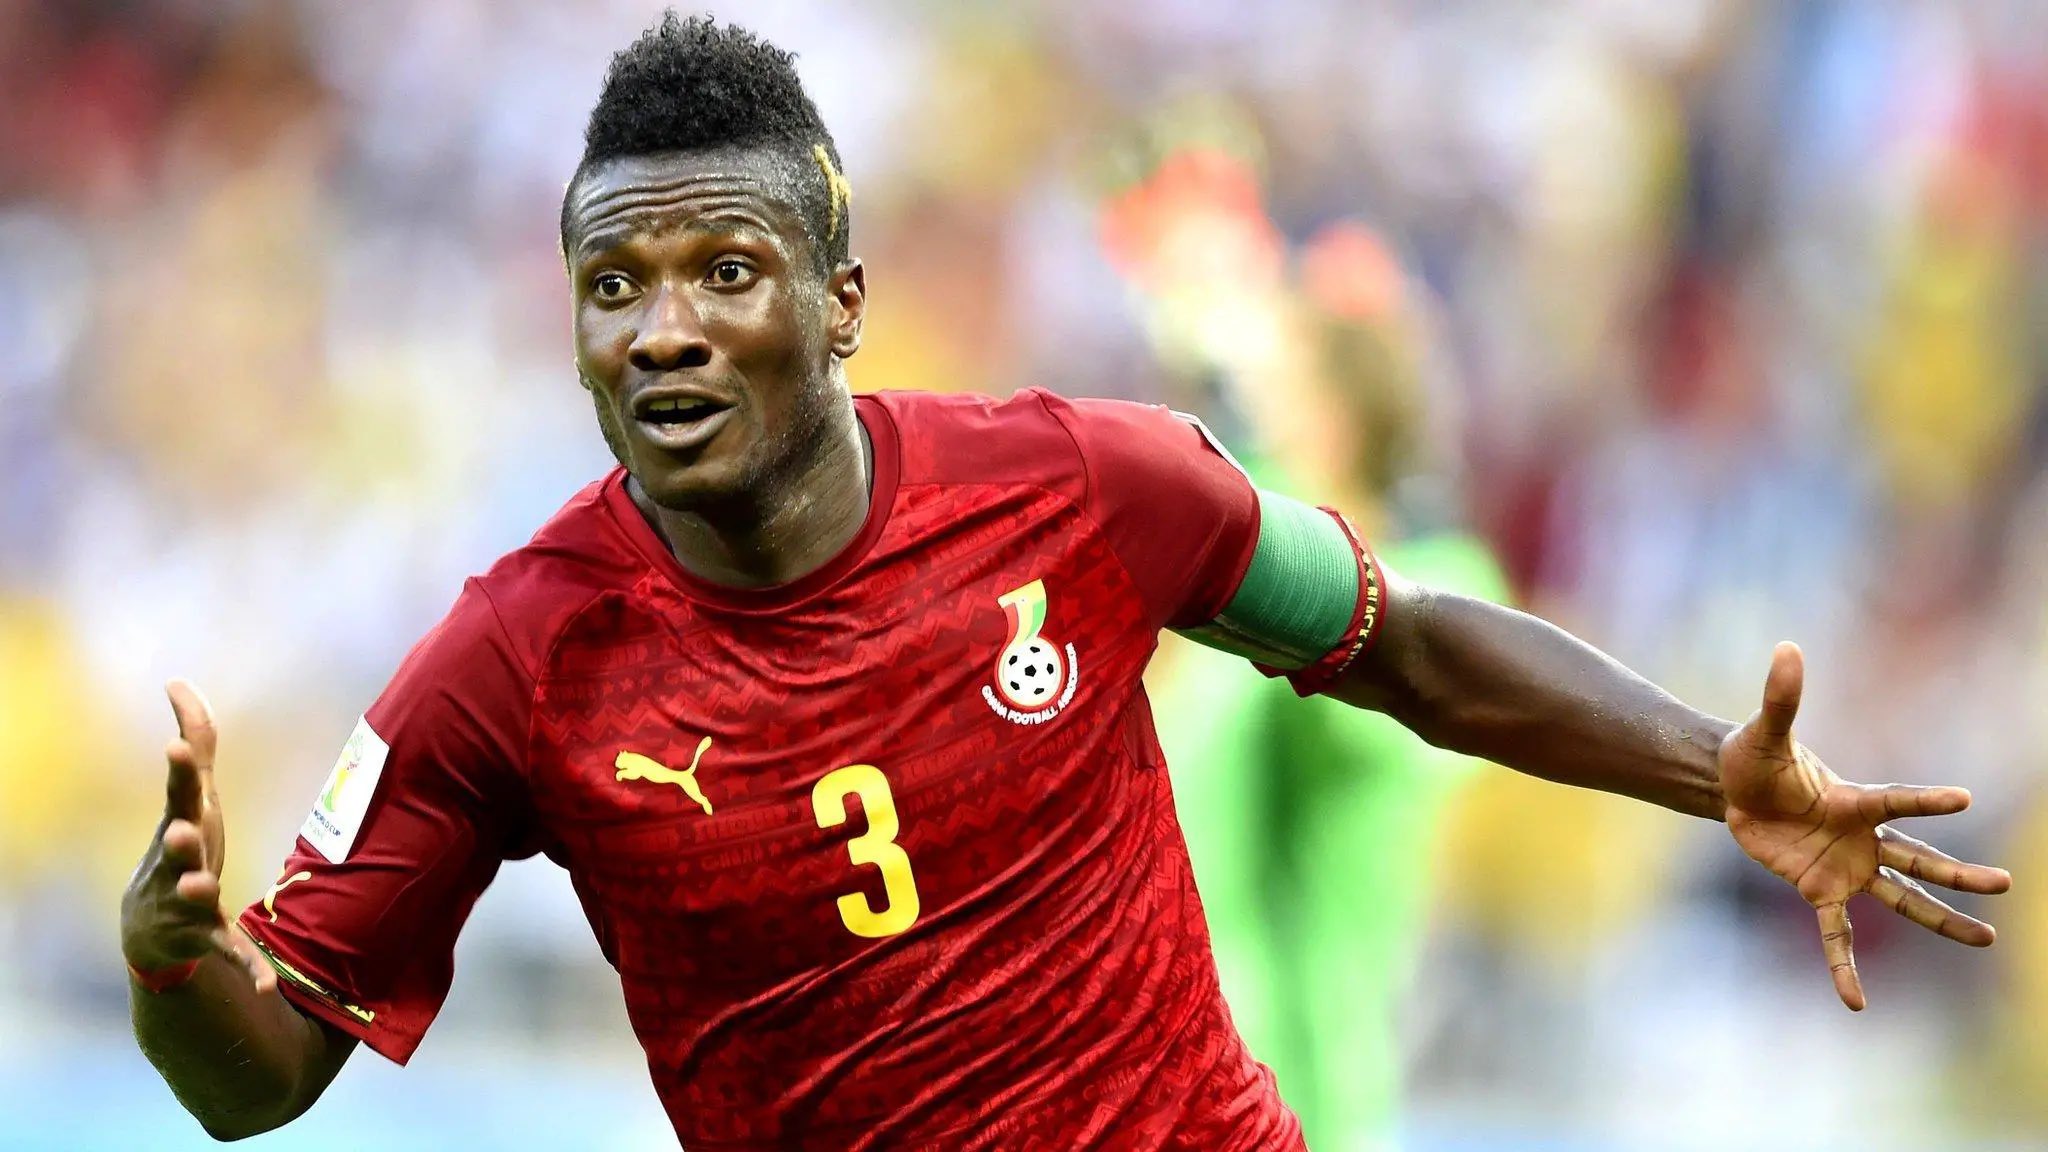 OFFICIAL: Asamoah Gyan Retires From Active Football